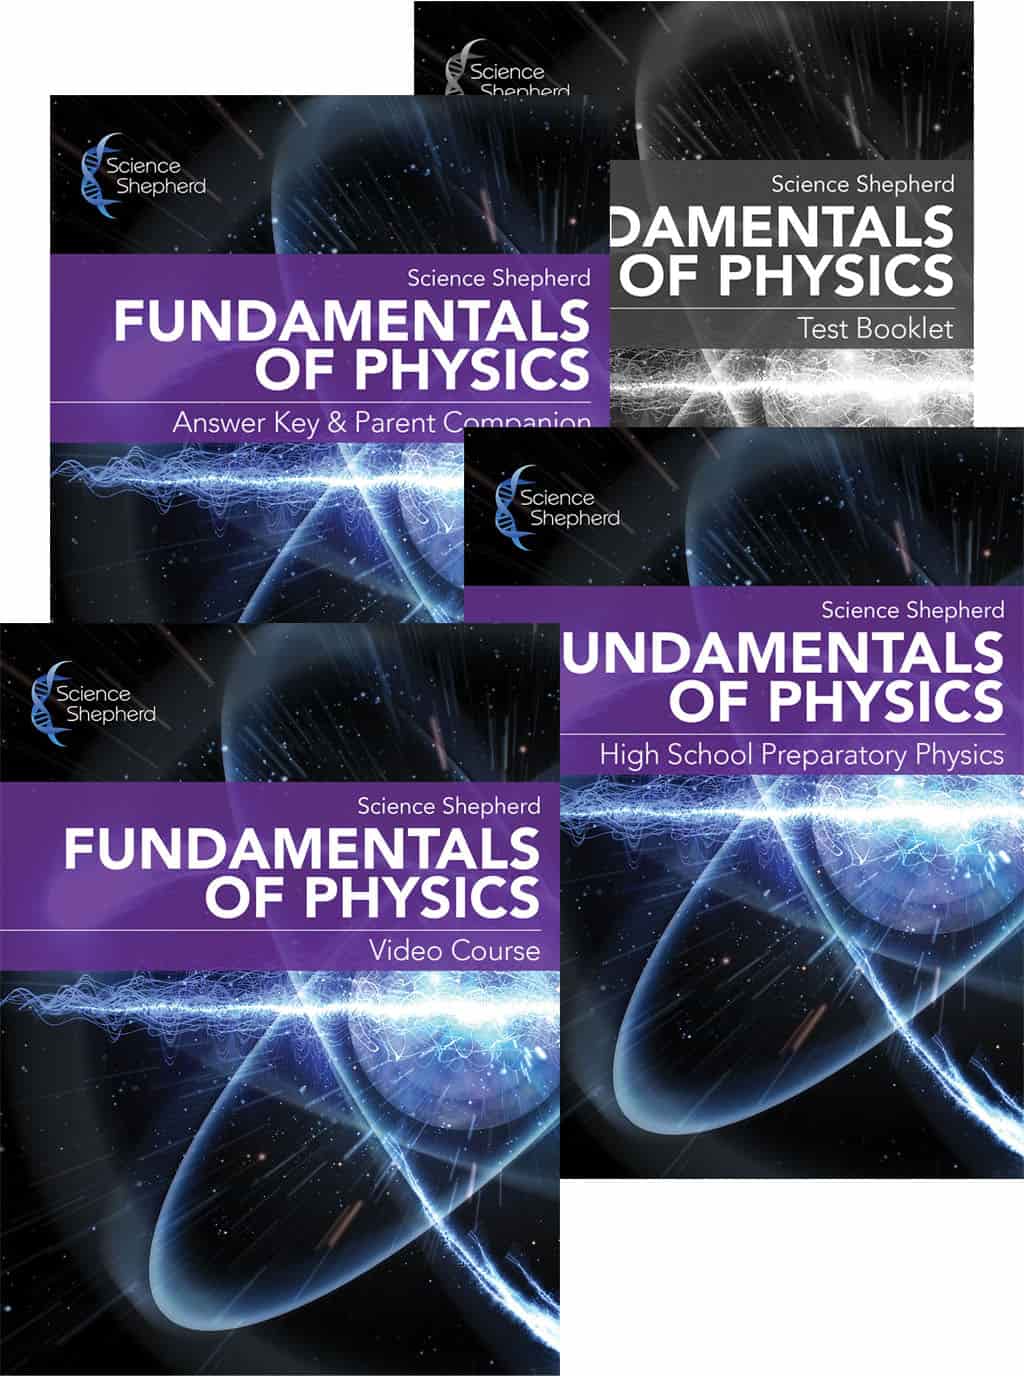 Fundamentals of Physics homeschool videos and 3-book set covers